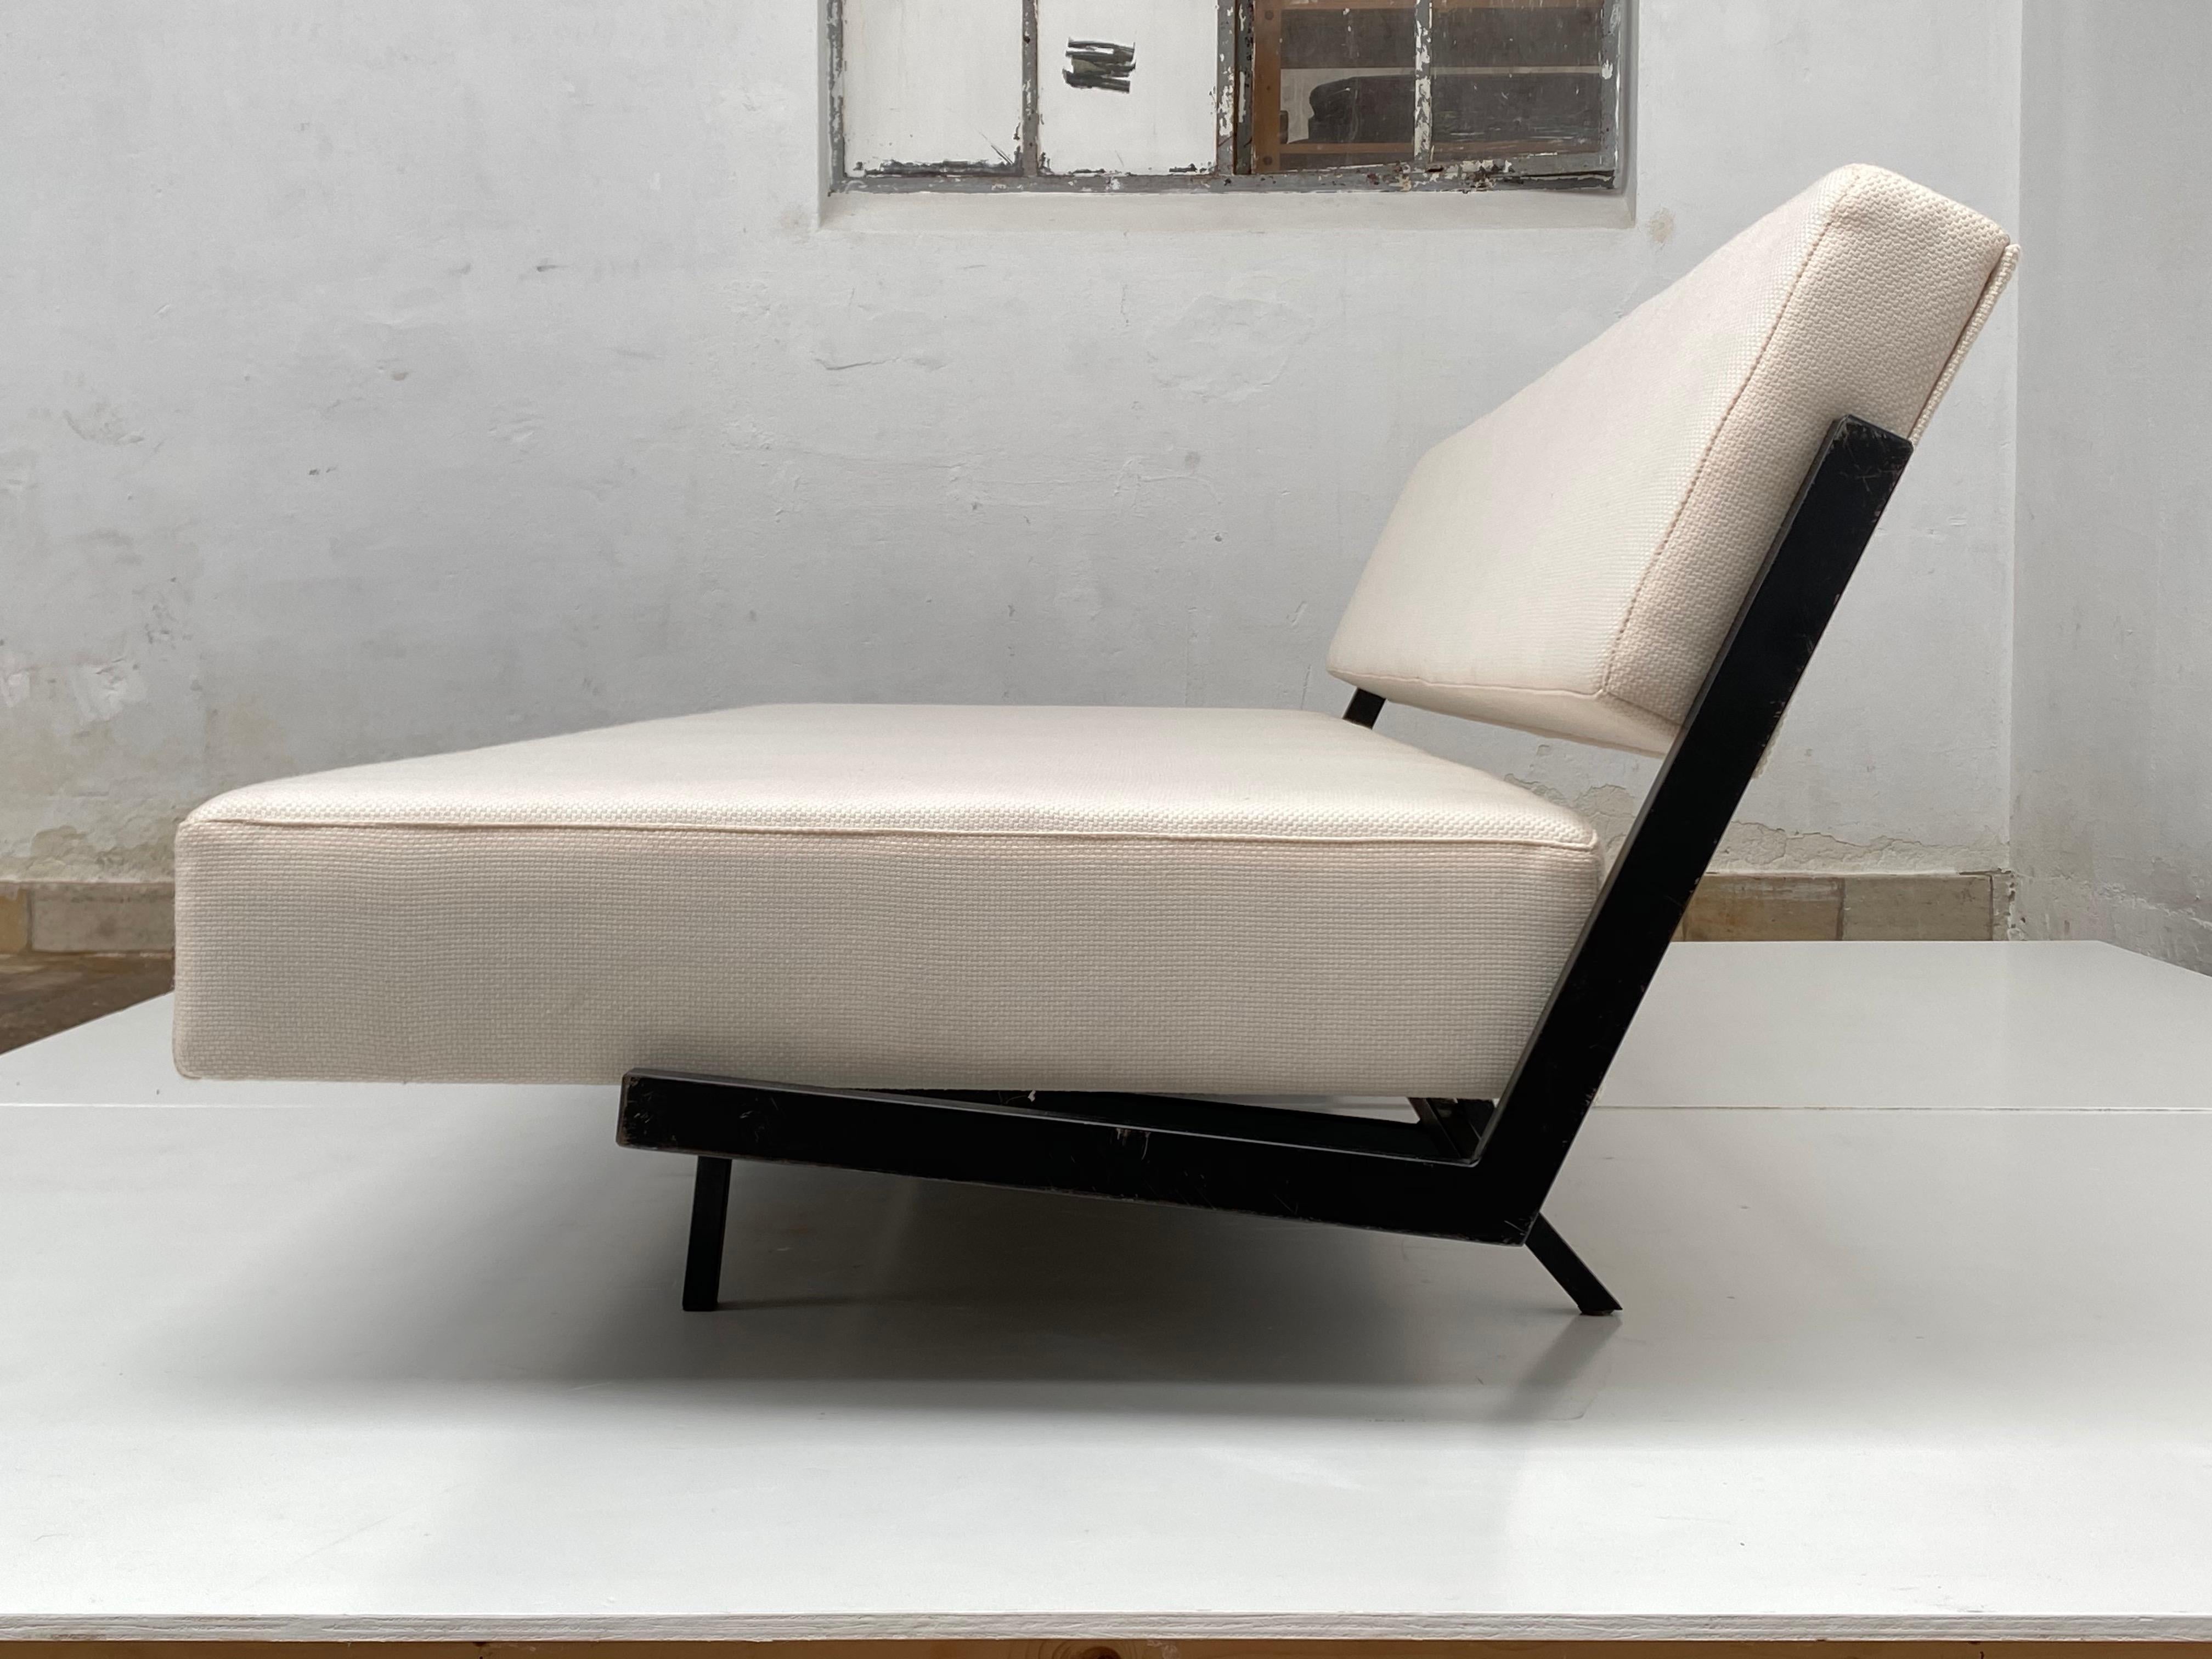 A midcentury Dutch minimal and functional design sleeping sofa that can be used in 2 positions sit / sleep

This daybed was most likely produced by Dutch Royal Auping who has a long history over 100 years in making beds and bedroom